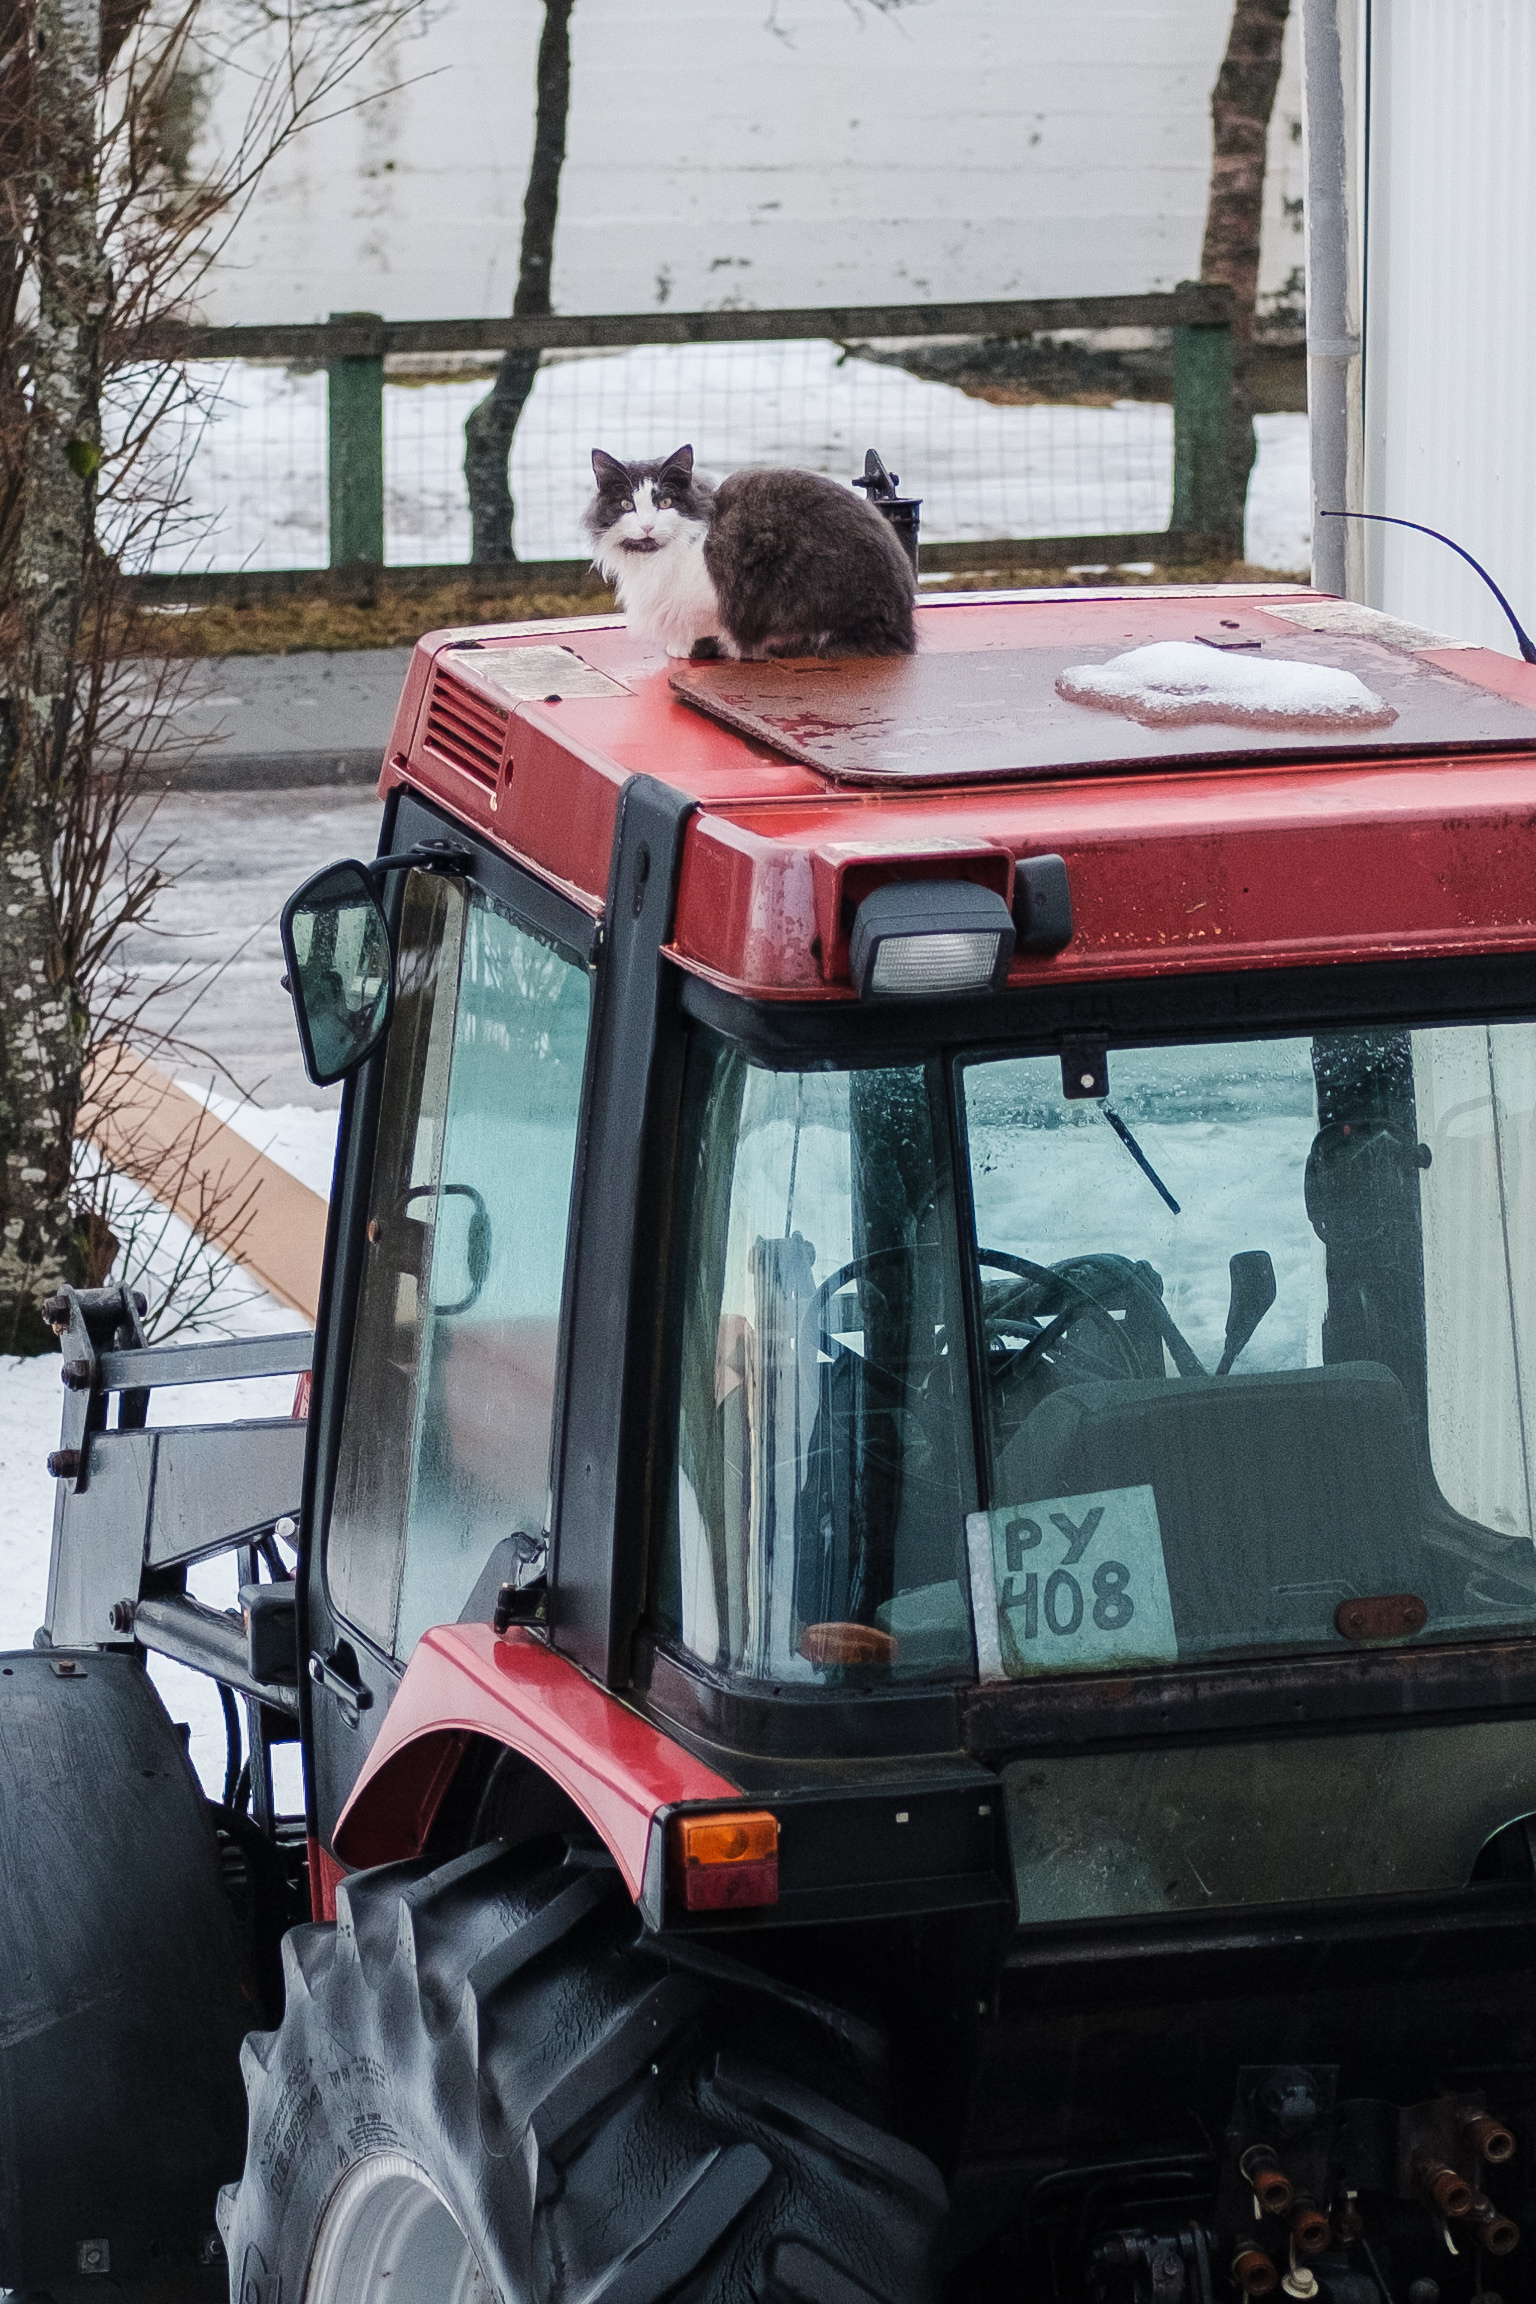 A grey and white cat is loafing on the roof of a tractor. The tractor has a handpainted license plate taped to its rear window.